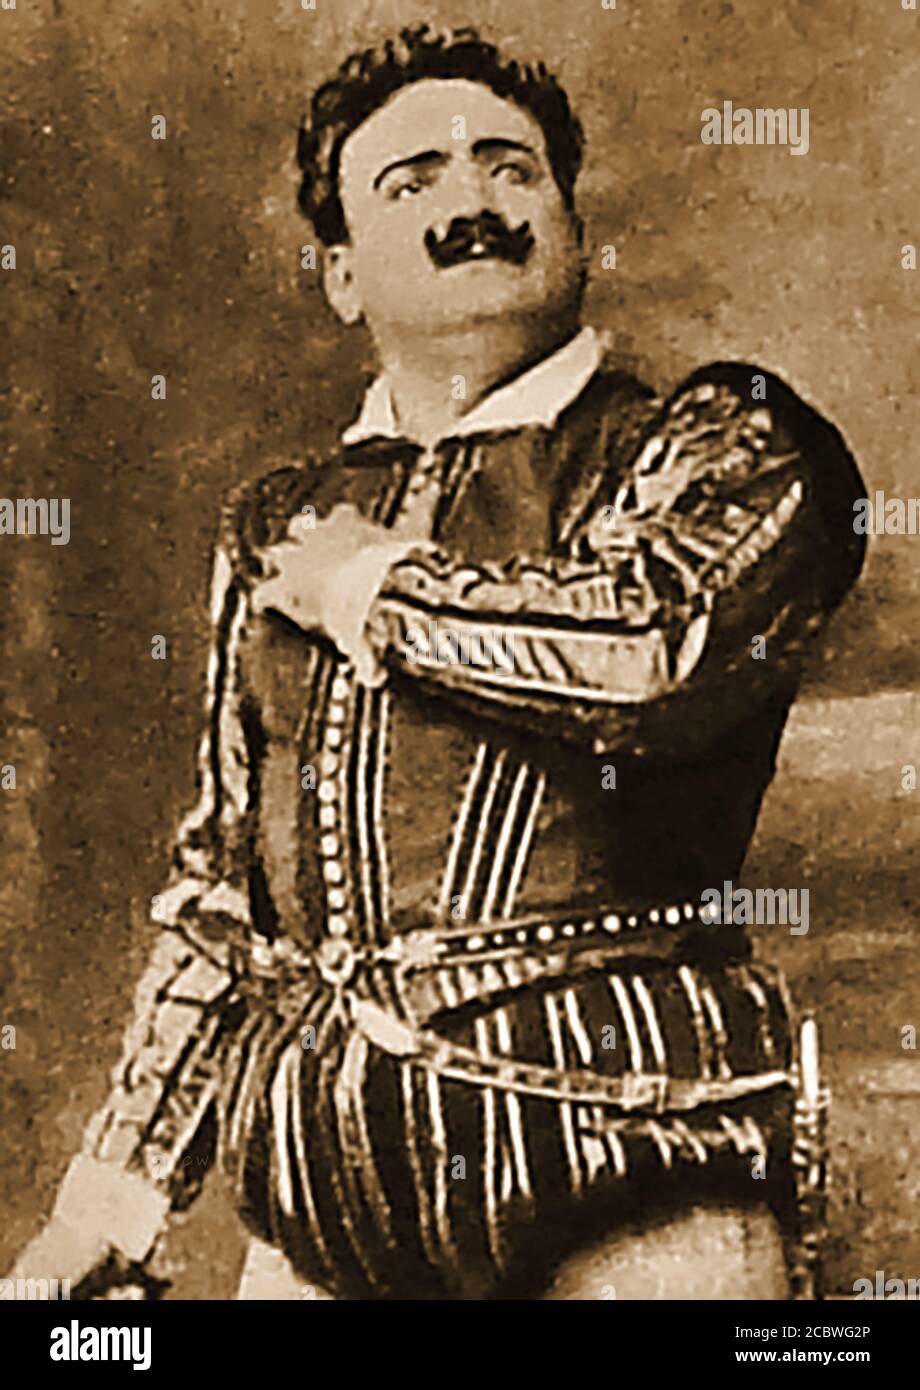 Enrico Caruso (1873-1921) dressed in period costume. Caruso was an internationally acclaimed,  Italian operatic tenor who performed at  major opera houses in Europe and the Americas with  his  Italian and French repertoires. He was one of the first singers of his time  to be commercially recorded. He was also an accomplished sketch artist and an avid collector of stamps,coins, watches and antique snuffboxes as well as a compiler of scrap books. Stock Photo